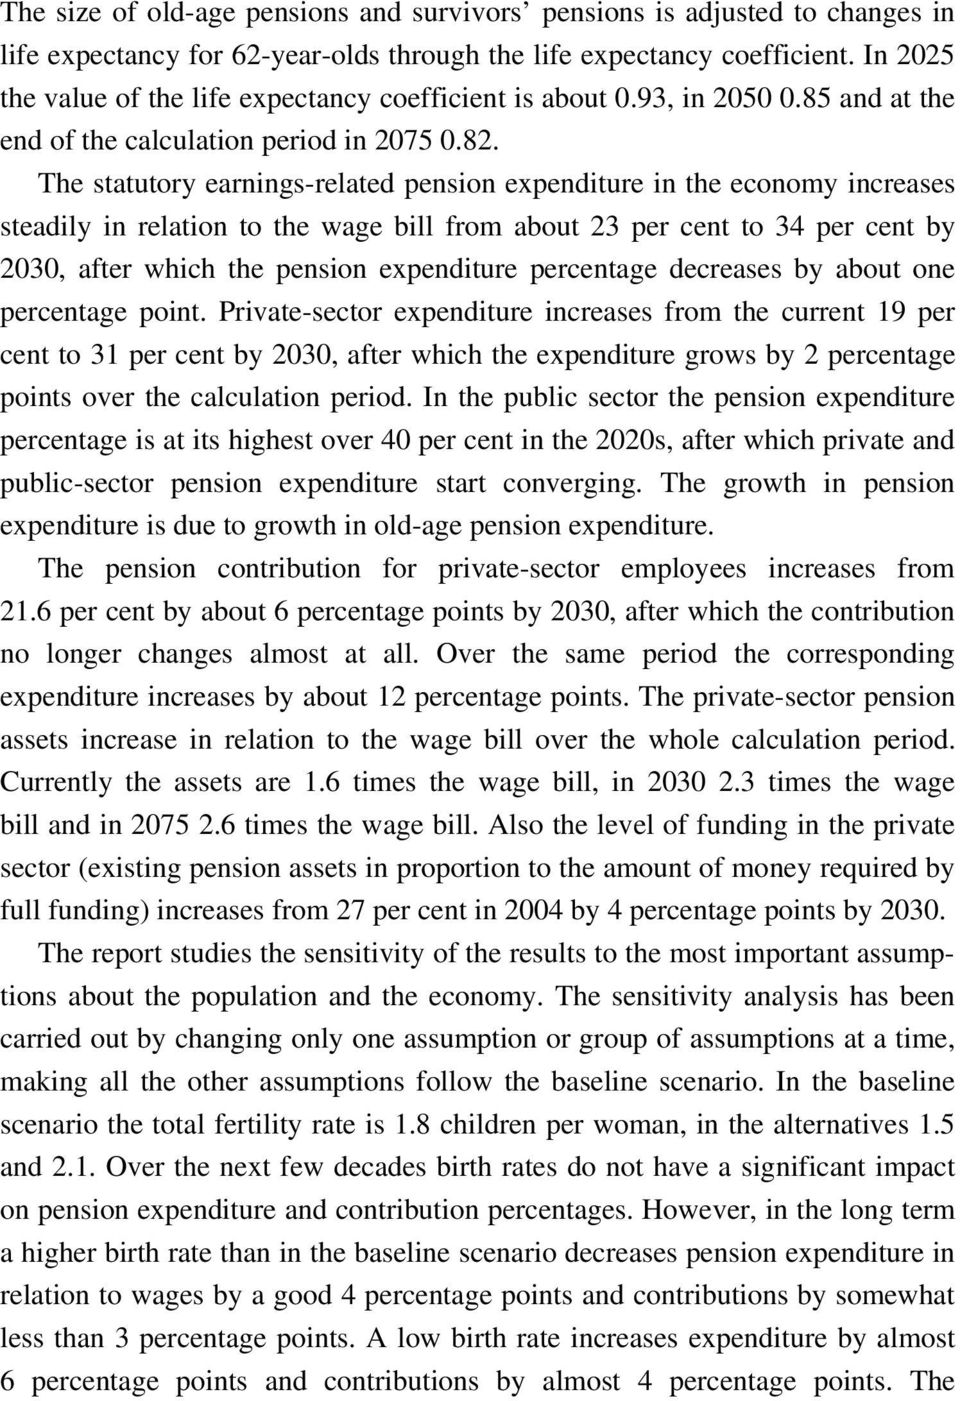 The statutory earnings-related pension expenditure in the economy increases steadily in relation to the wage bill from about 23 per cent to 34 per cent by 2030, after which the pension expenditure